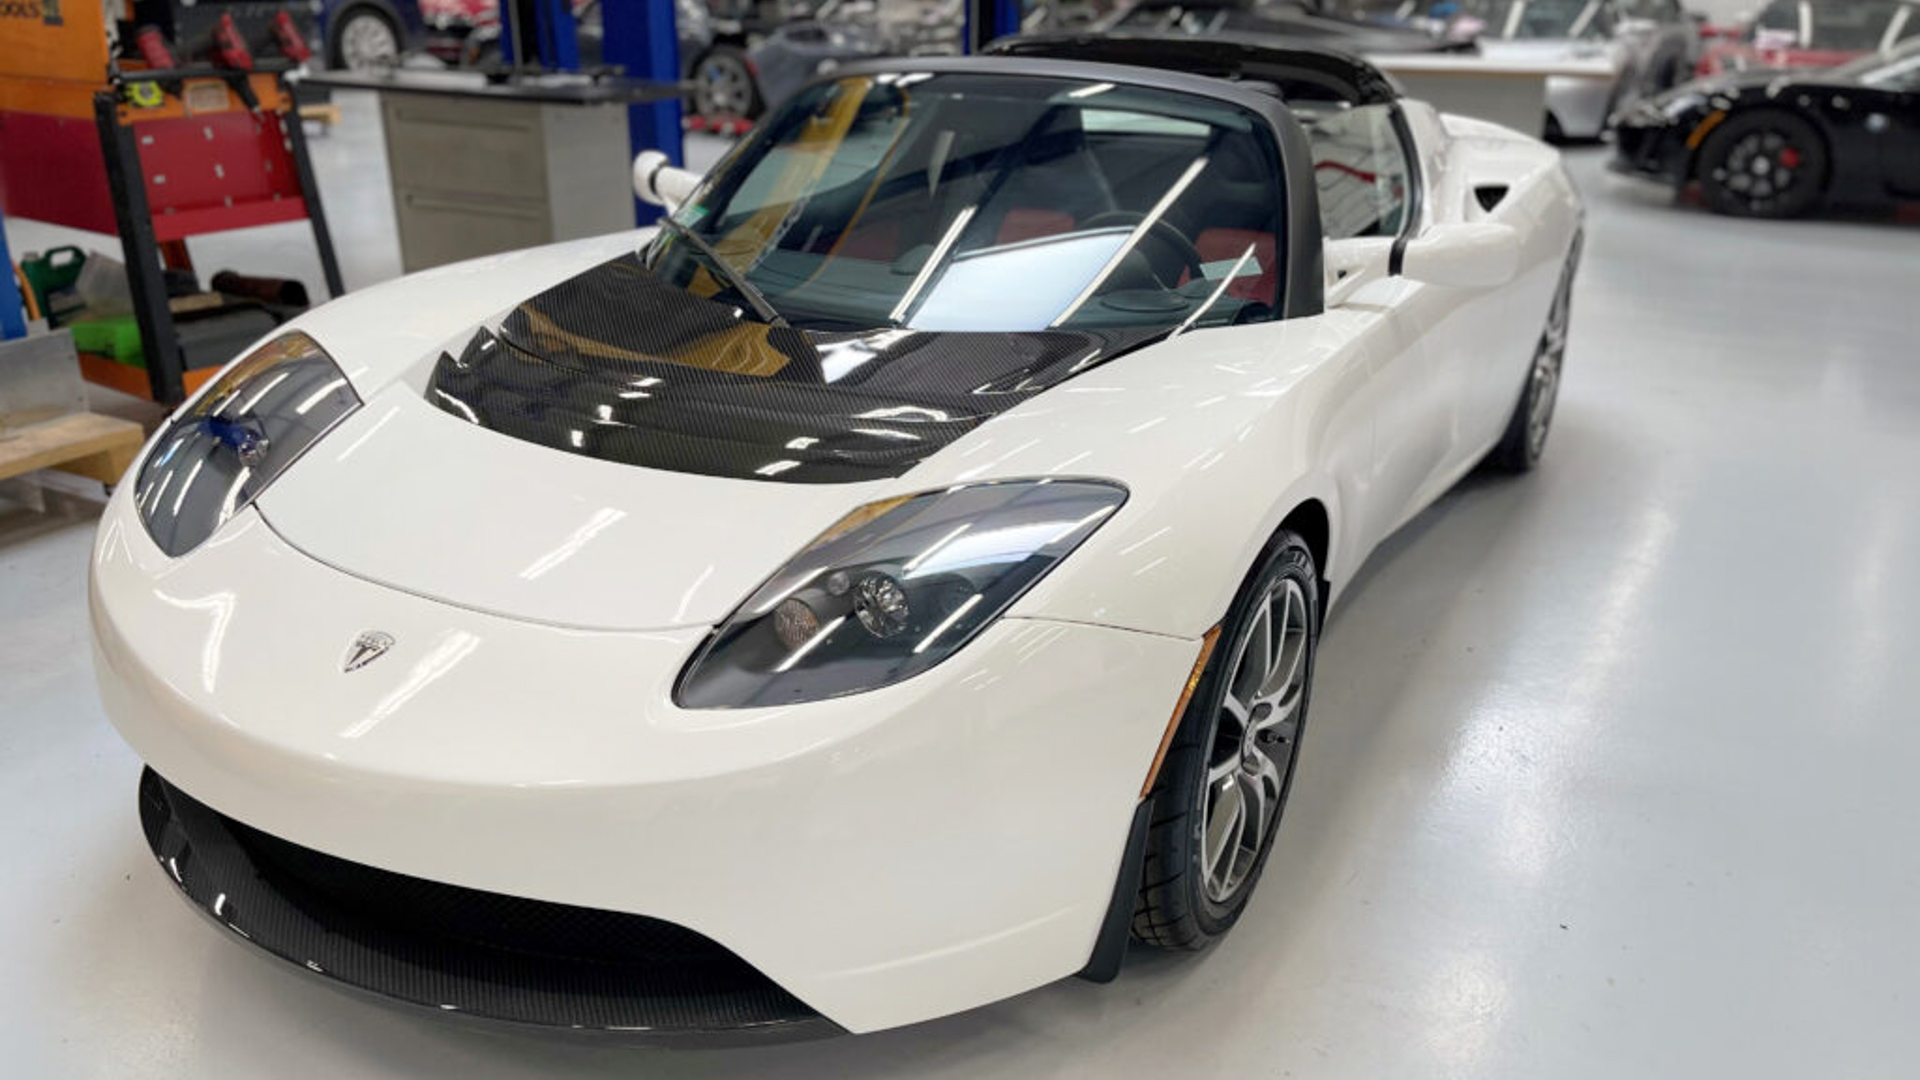 Pristine 38-Mile Tesla Roadster Emerges From Arizona Garage for Auction